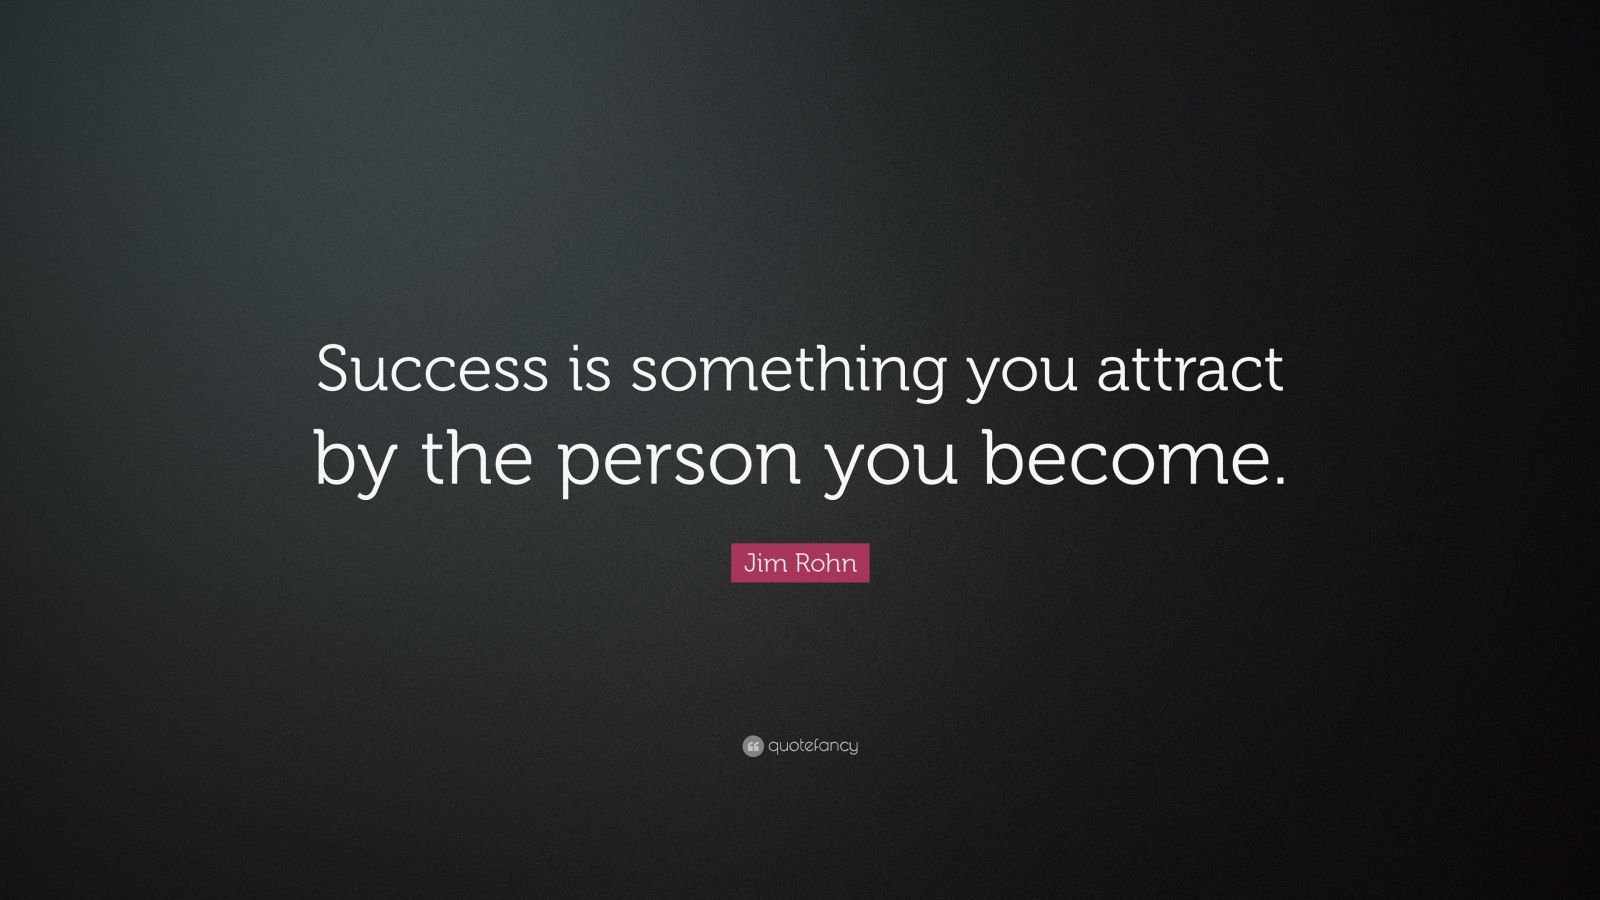 Jim Rohn Quote: “Success is something you attract by the person you ...